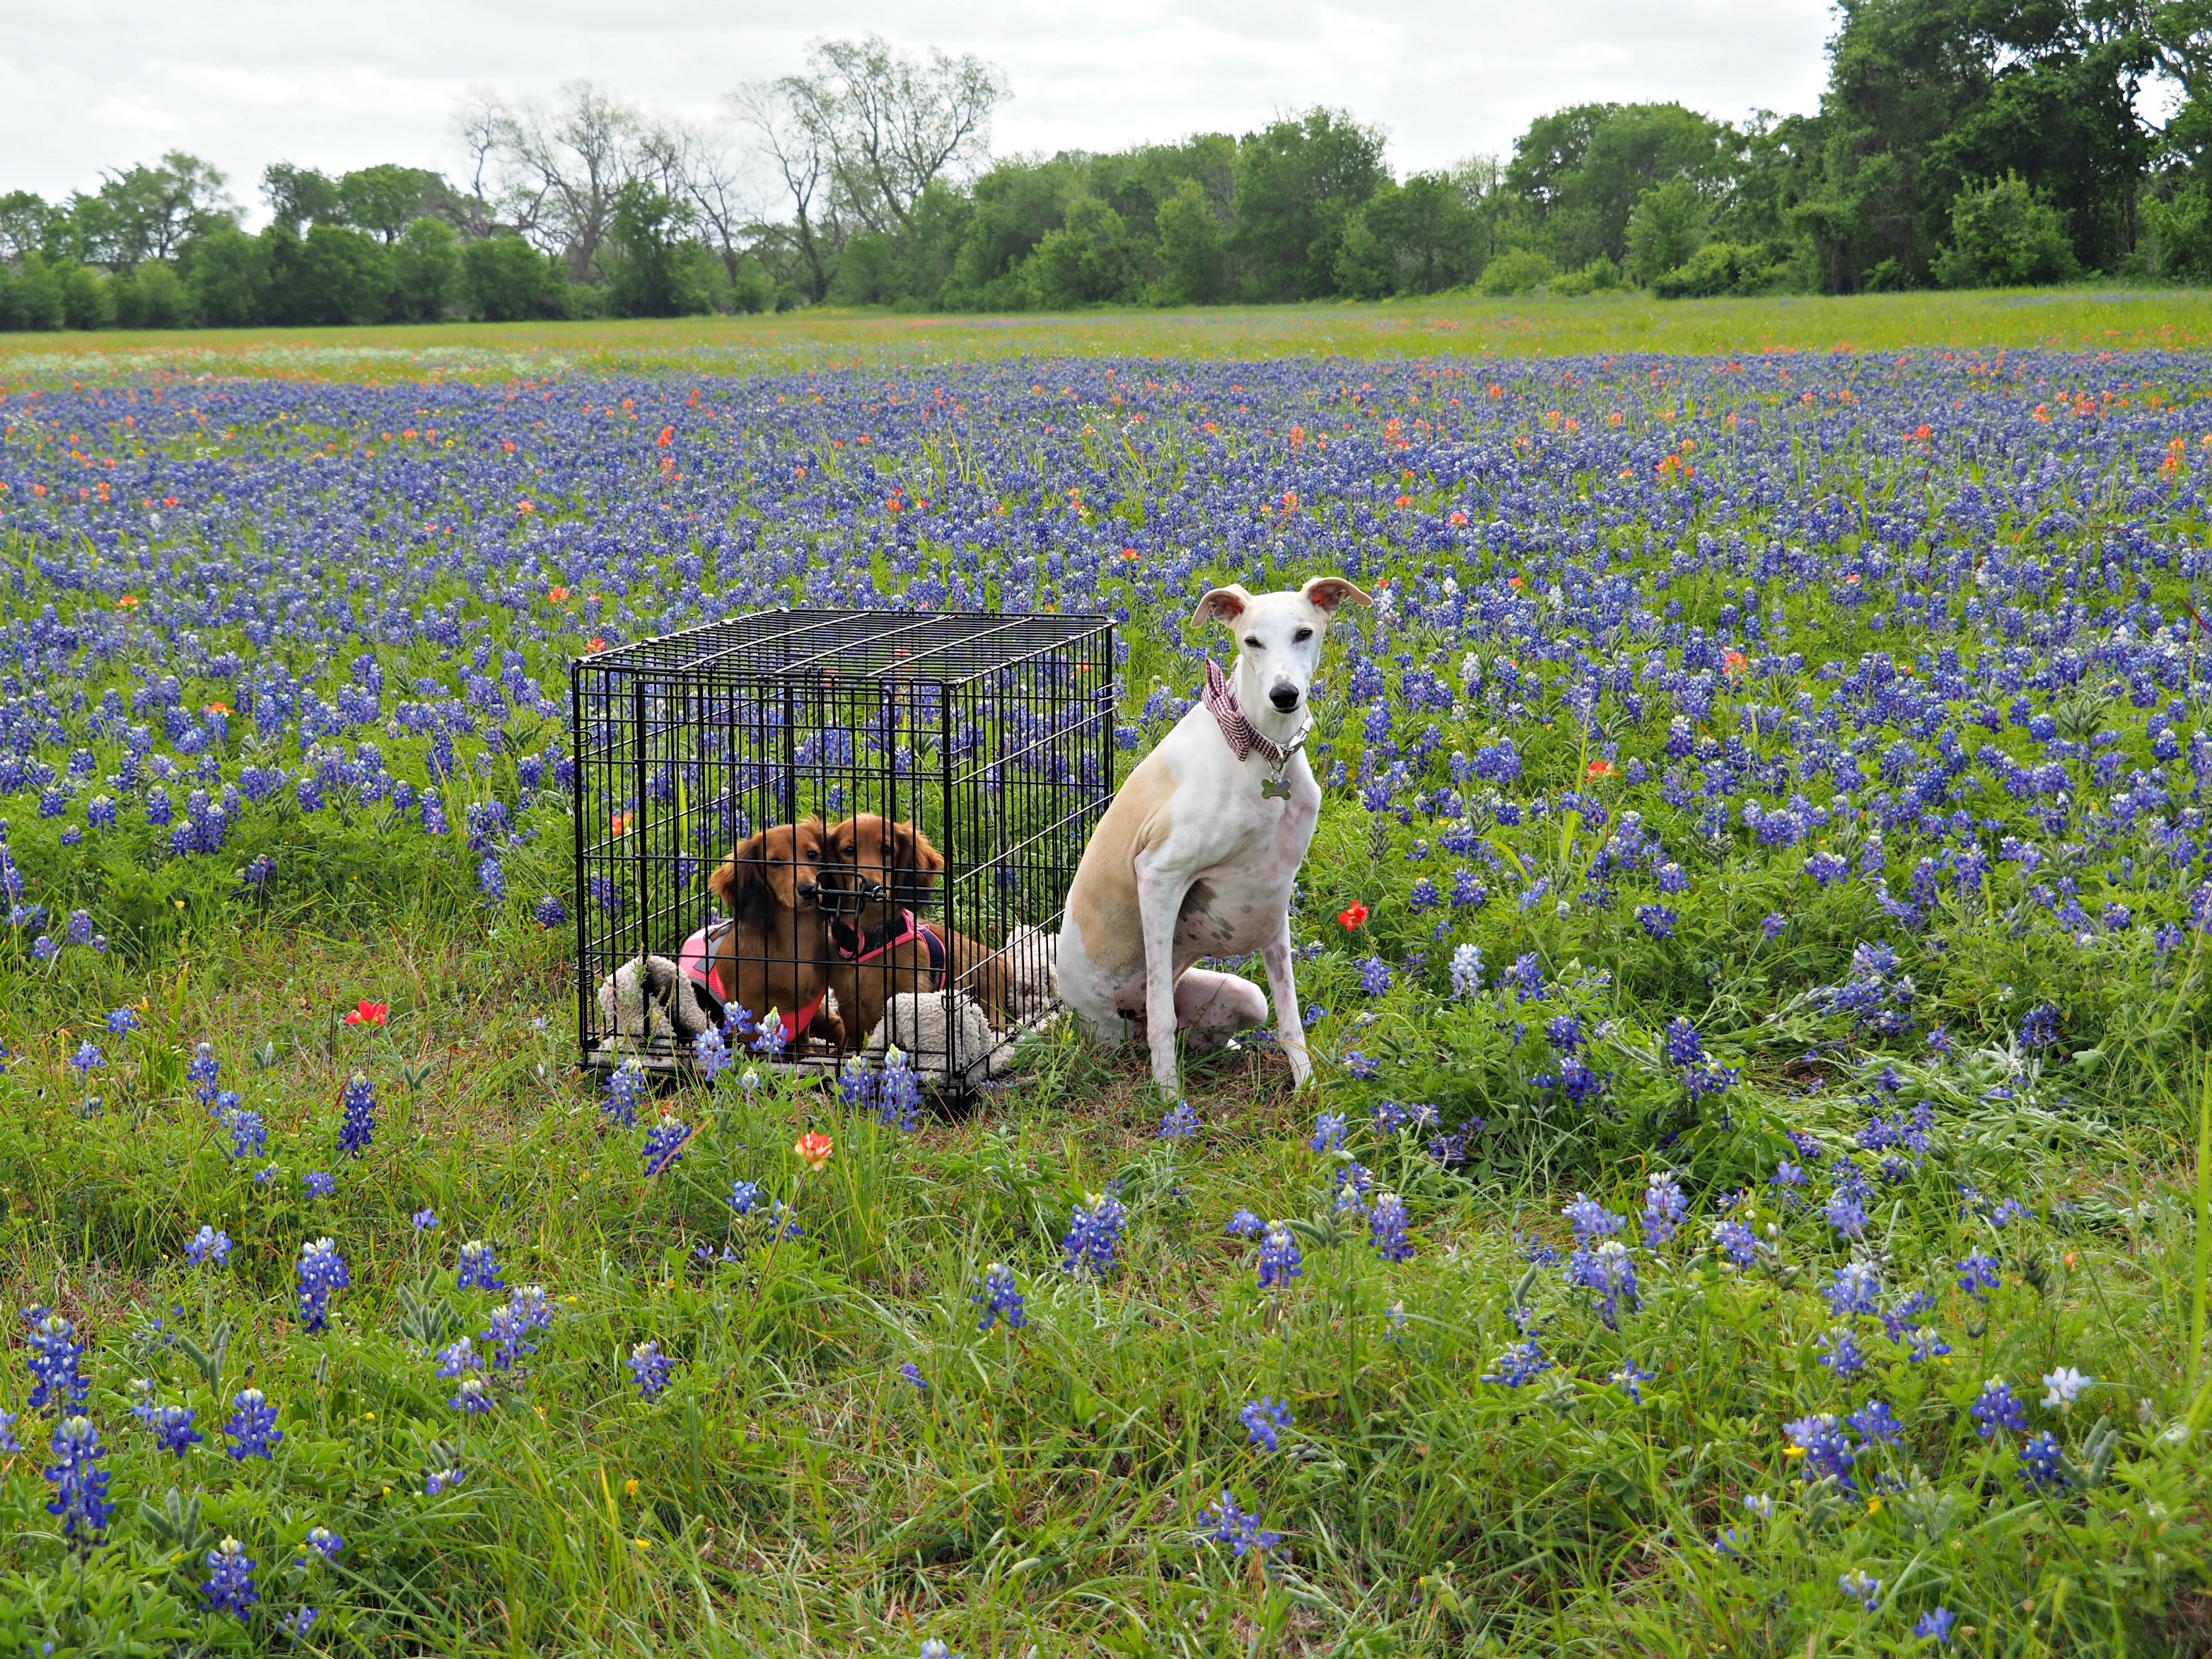 The Weekend With All The Bluebonnets - The Wandering Weekenders